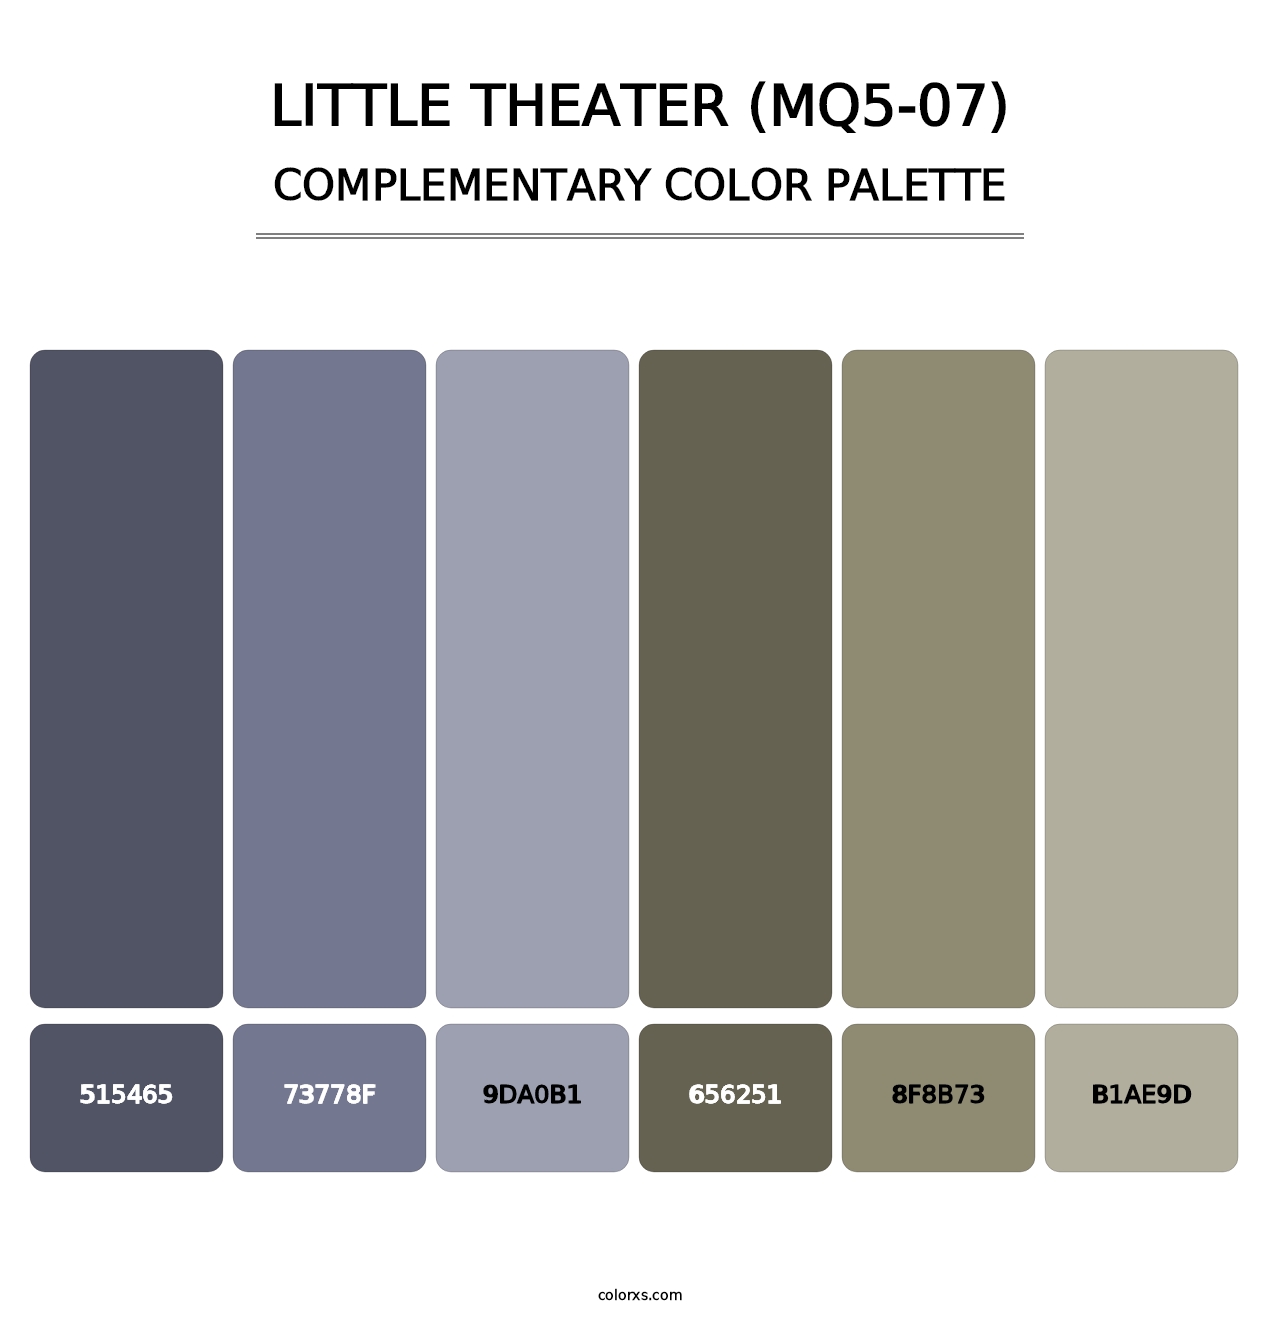 Little Theater (MQ5-07) - Complementary Color Palette